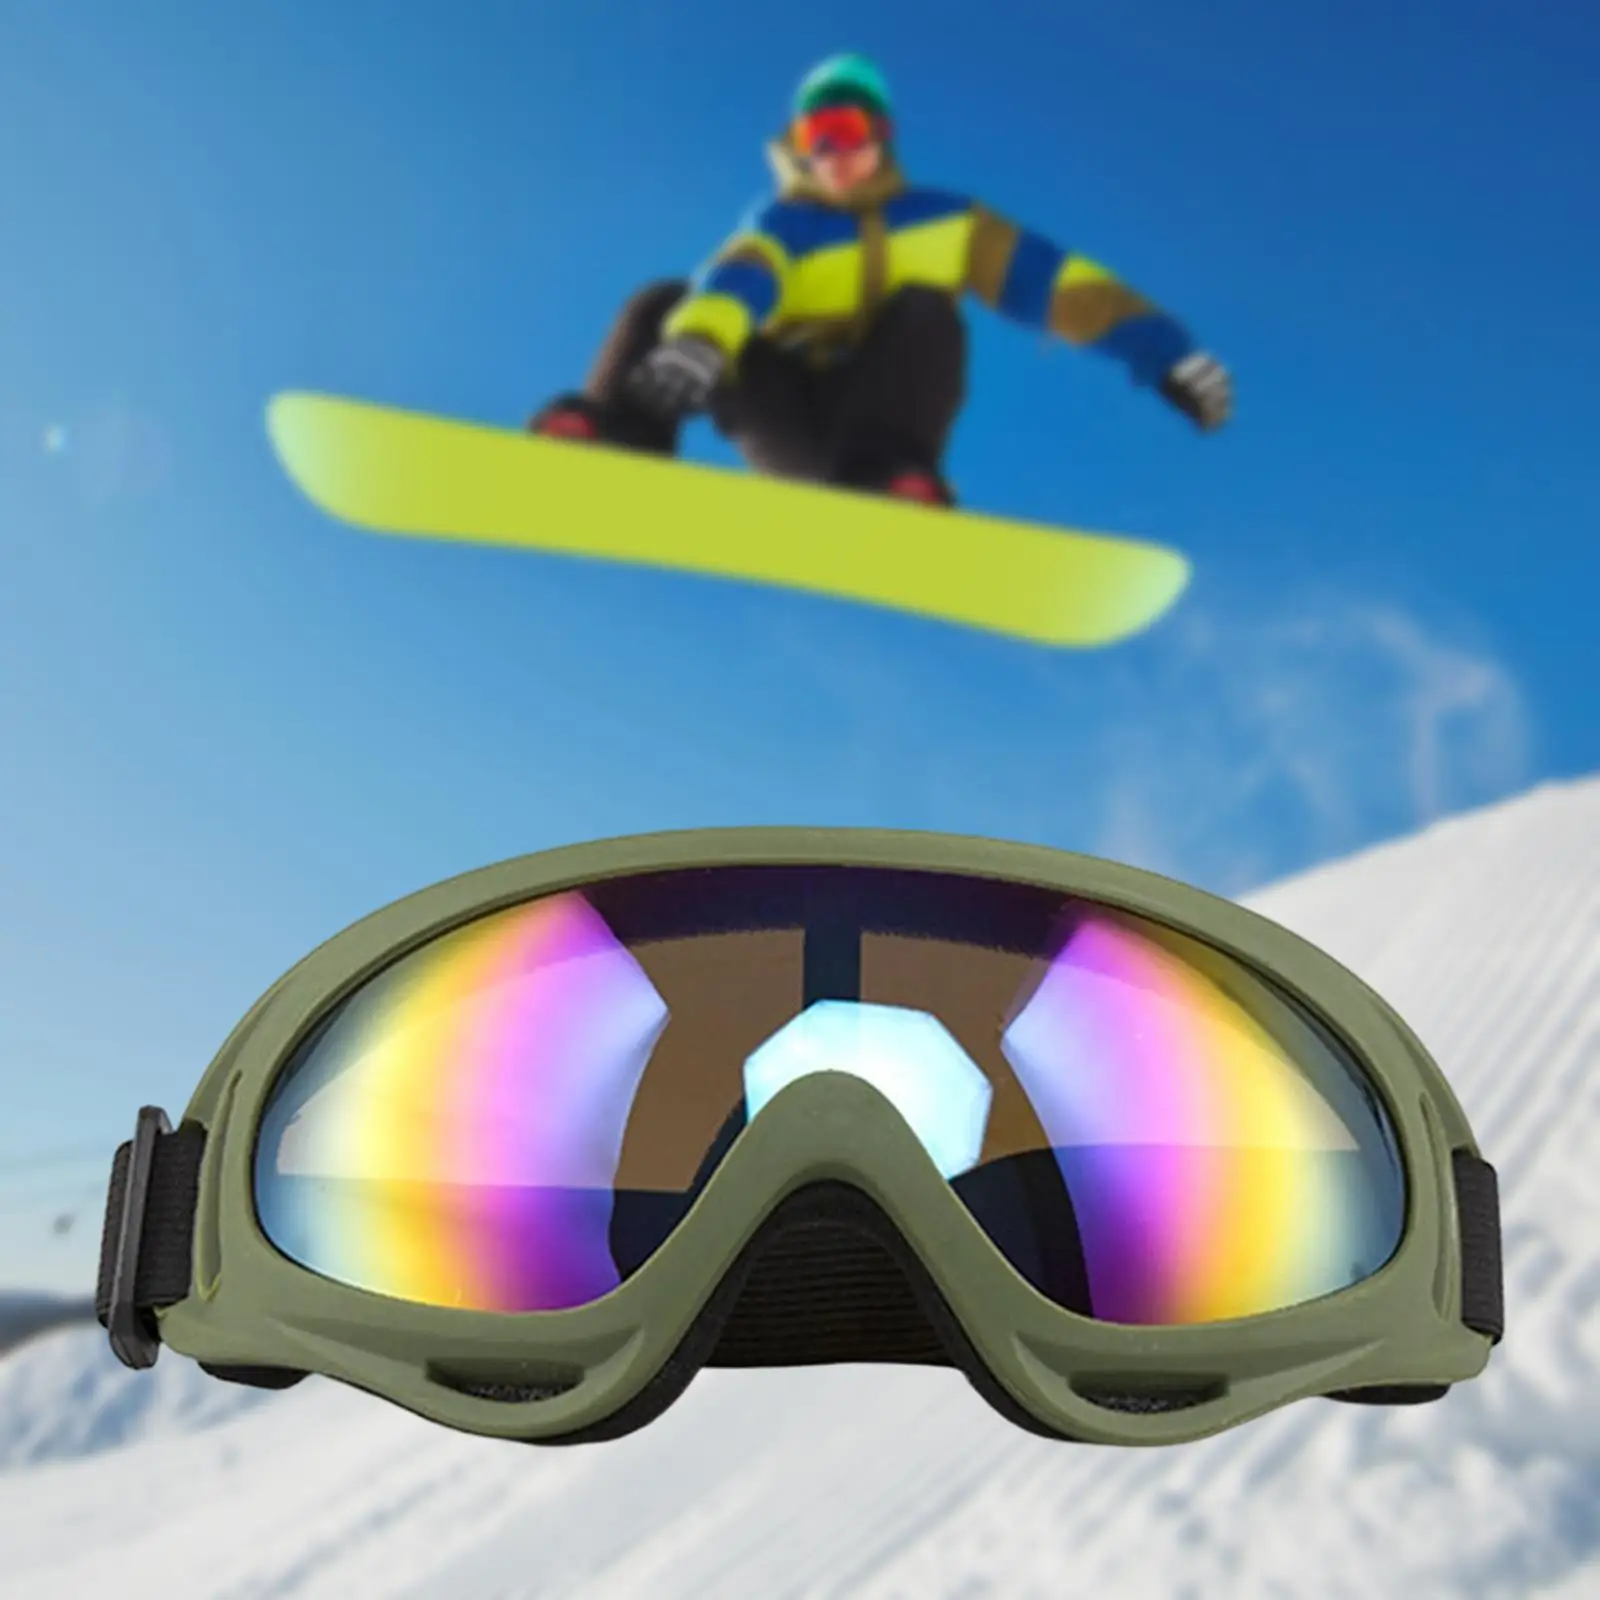 Outdoor Sports Ski Goggles with Adjustable Strap Windproof for Adult Skating